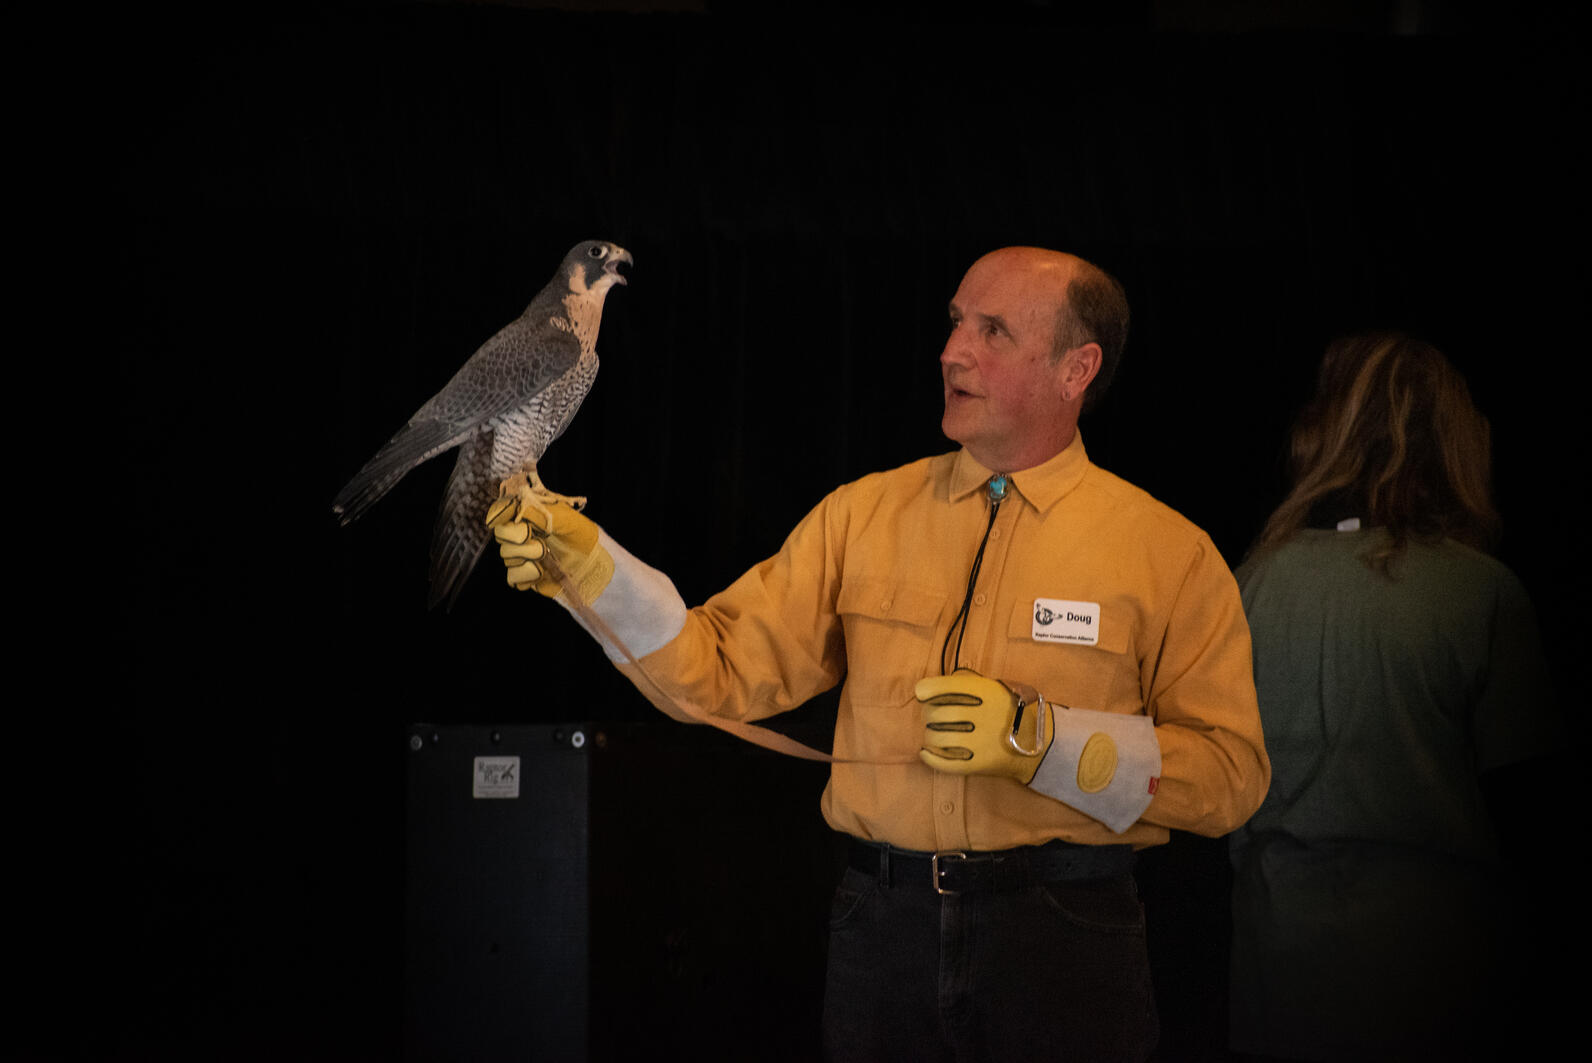 Doug Finch of Raptor Conservation Alliance with Shasta, a Peregrine Falcon. 